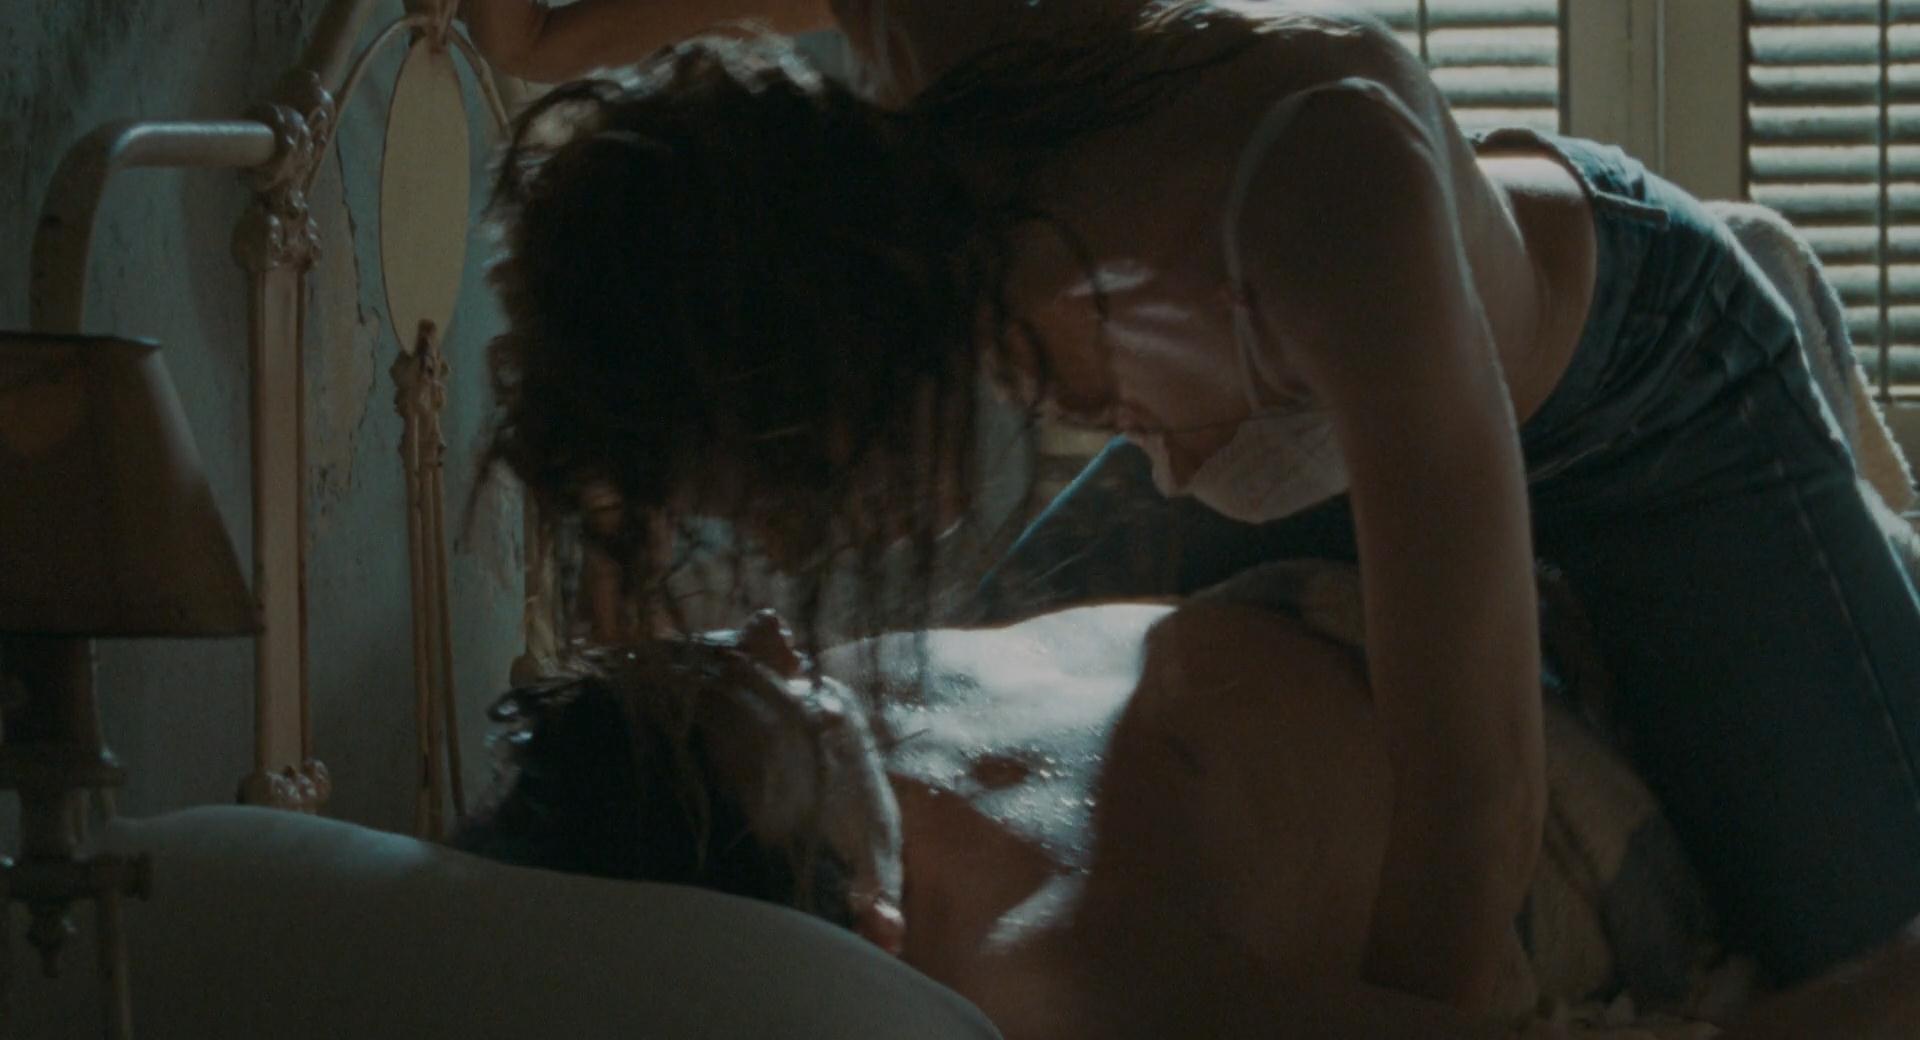 Naked Amber Heard In The Rum Diary